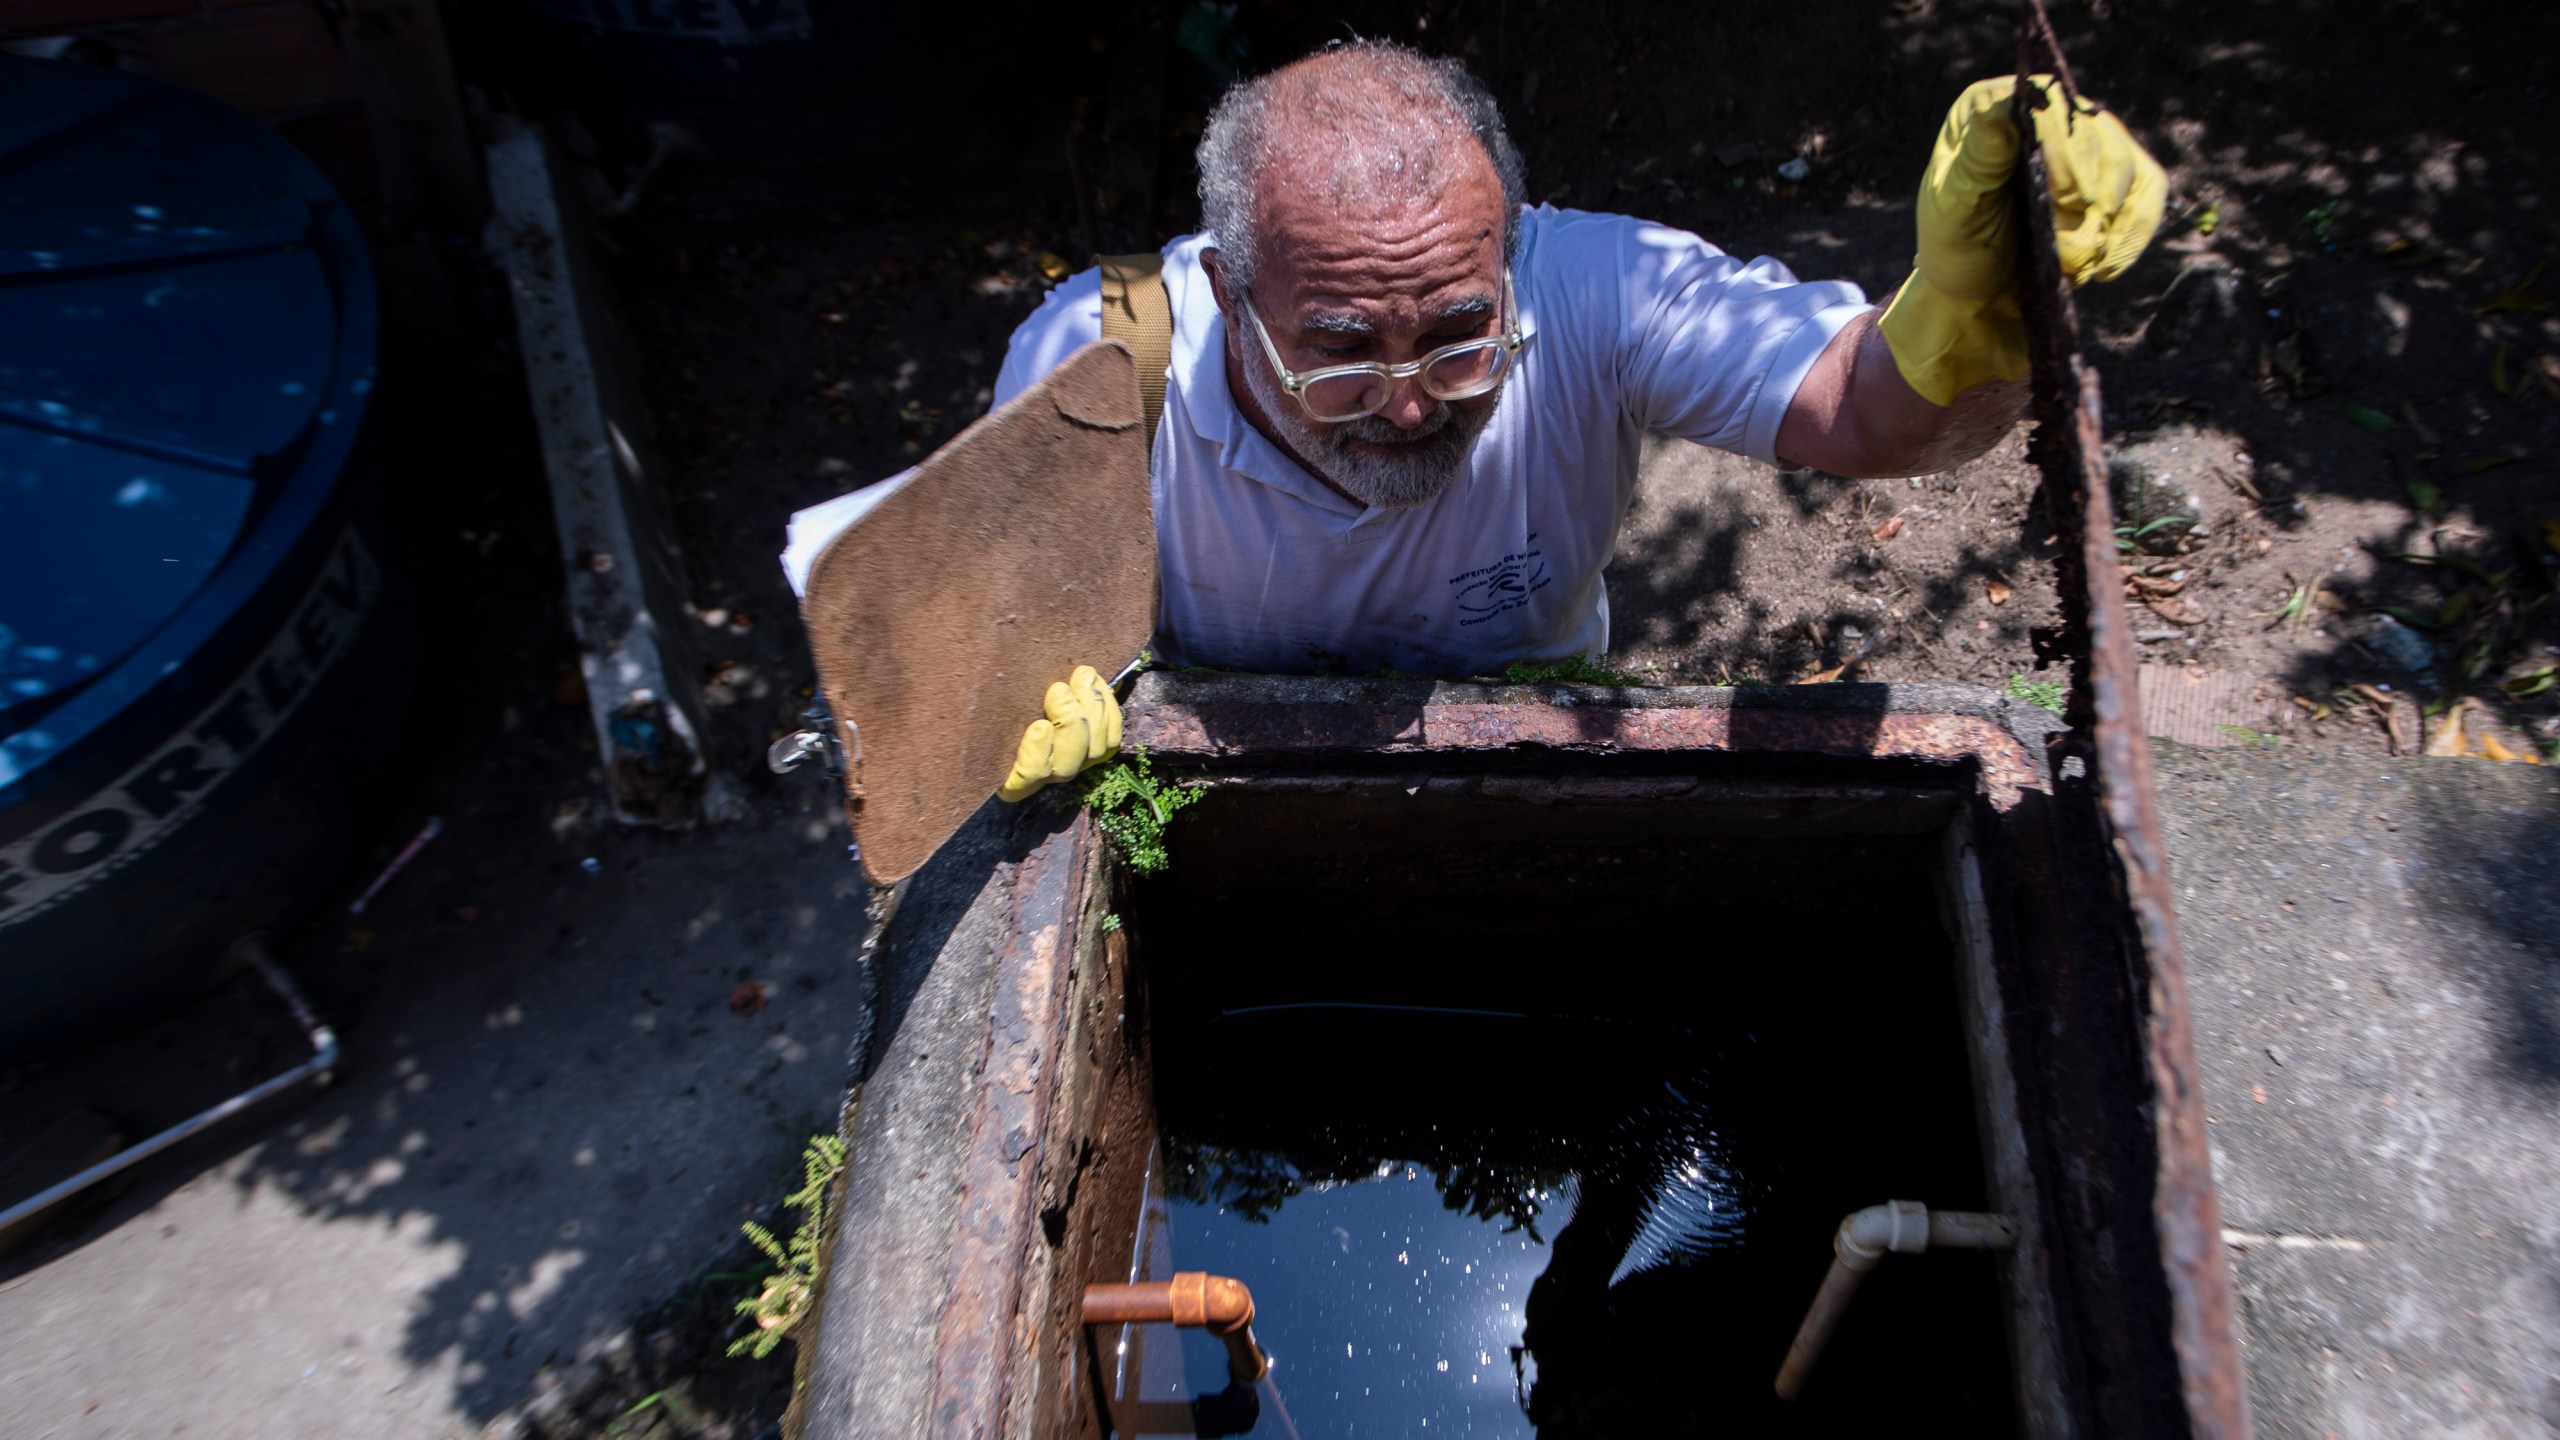 Augusto Cesar, a city worker who combats endemic diseases, inspects a water tank where mosquitoes can breed to eradicate the Aedes aegypti mosquito which can spread dengue in the Morro da Penha favela of Niteroi, Brazil, Friday, March 1, 2024. (AP Photo/Bruna Prado)